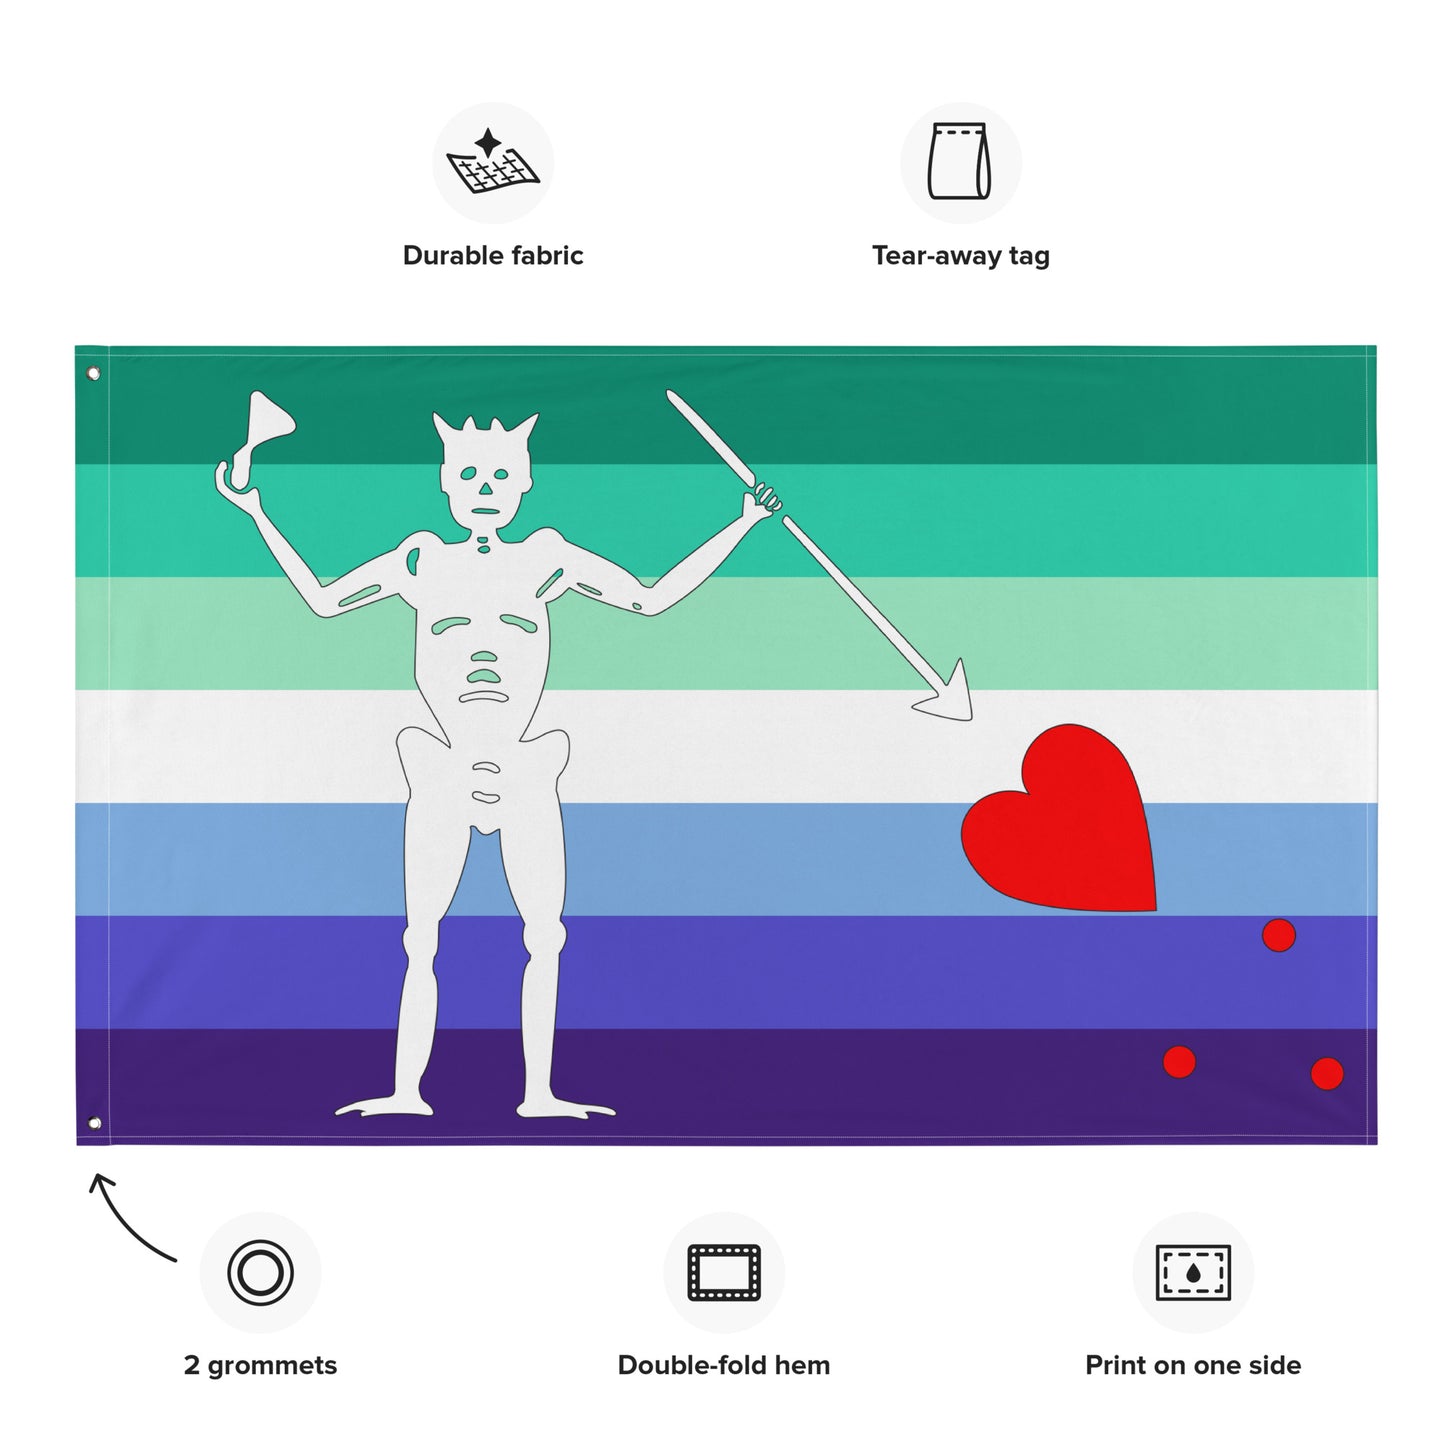 the gay mlm flag with blackbeard's symbol surrounded by the specifications of "durable fabric, tear-away tag, 2 grommets, double-fold hem, print on one side"